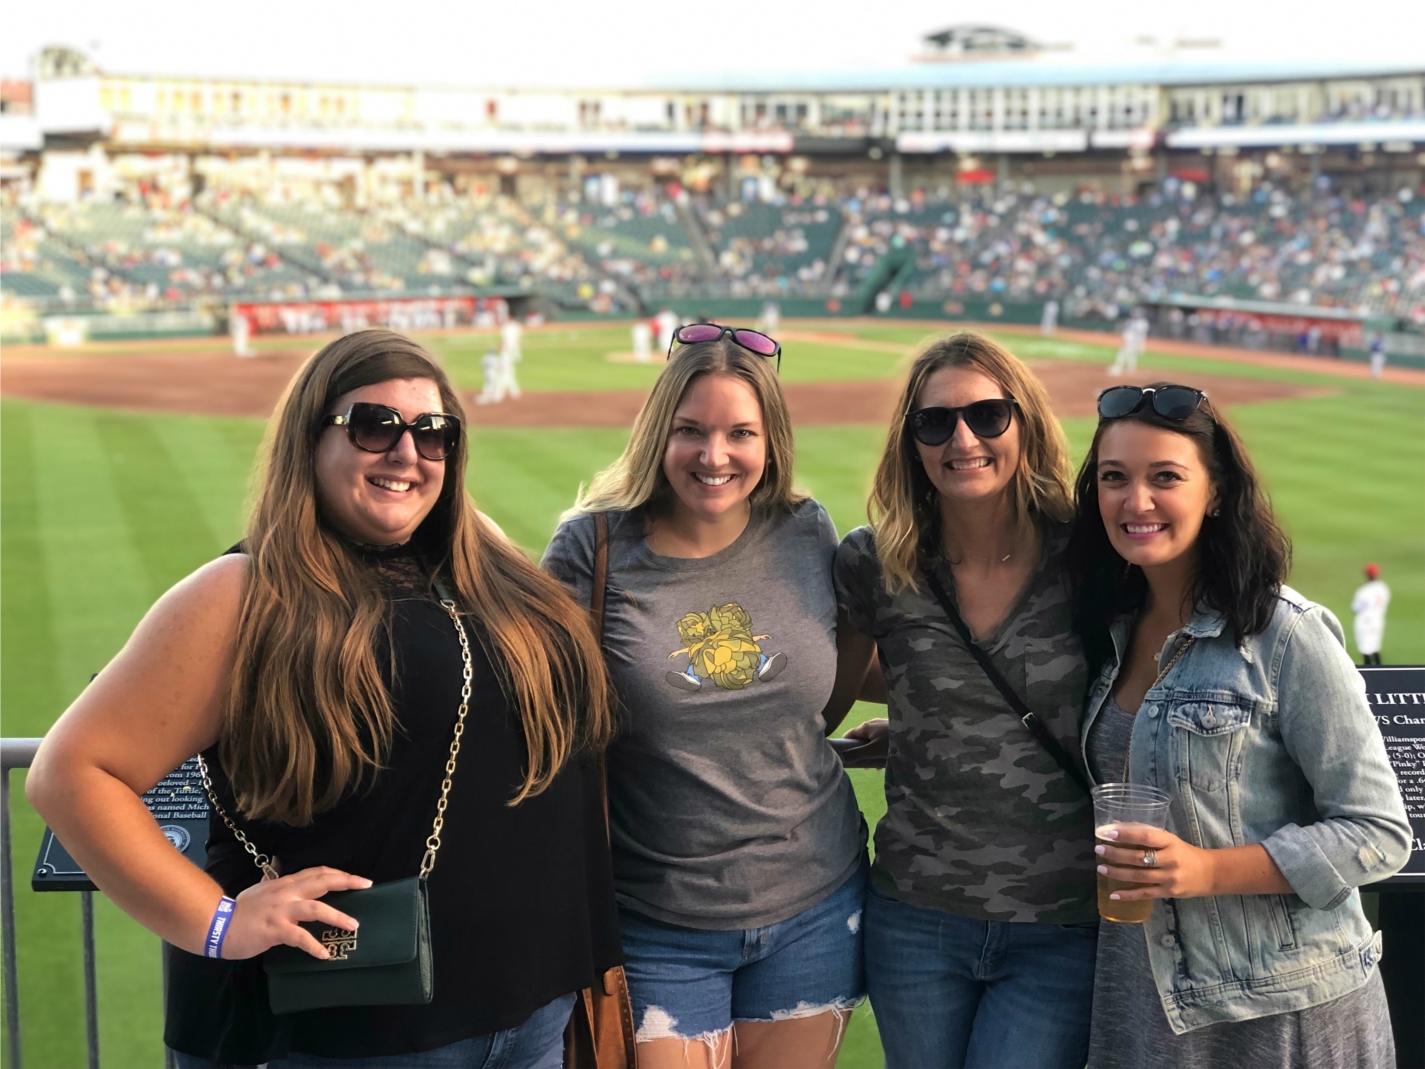 Every summer Wieland employees and their family members attend a Lansing Lugnuts baseball game. 